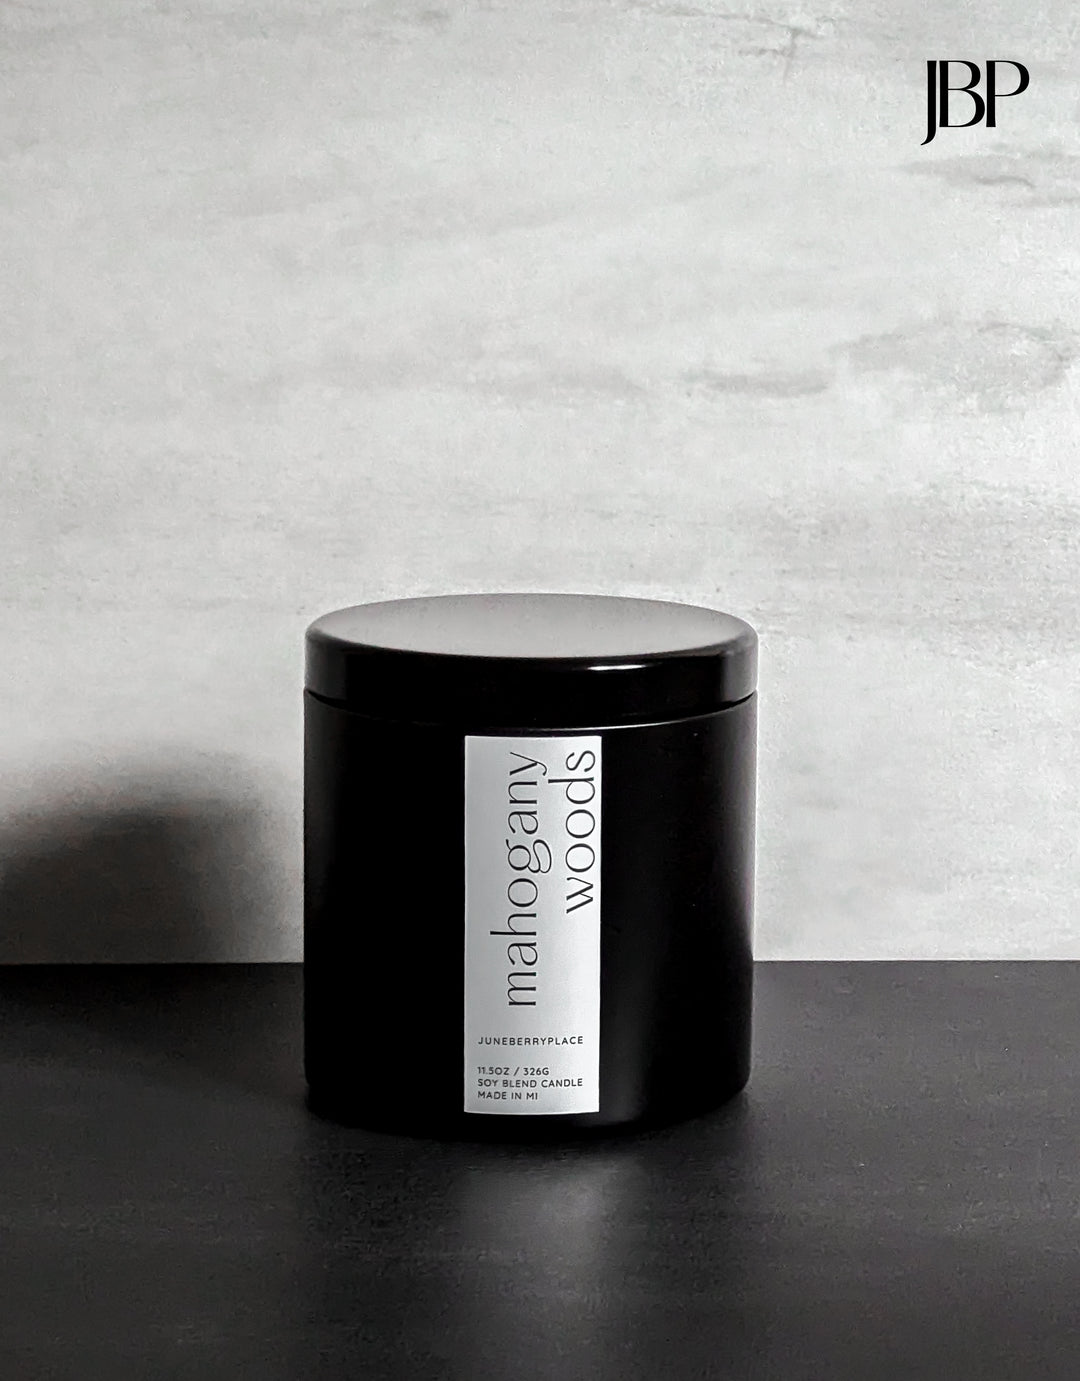 Mahogany Woods Wood Wick Soy Candle in matte black vessel by juneberryplace home fragrances